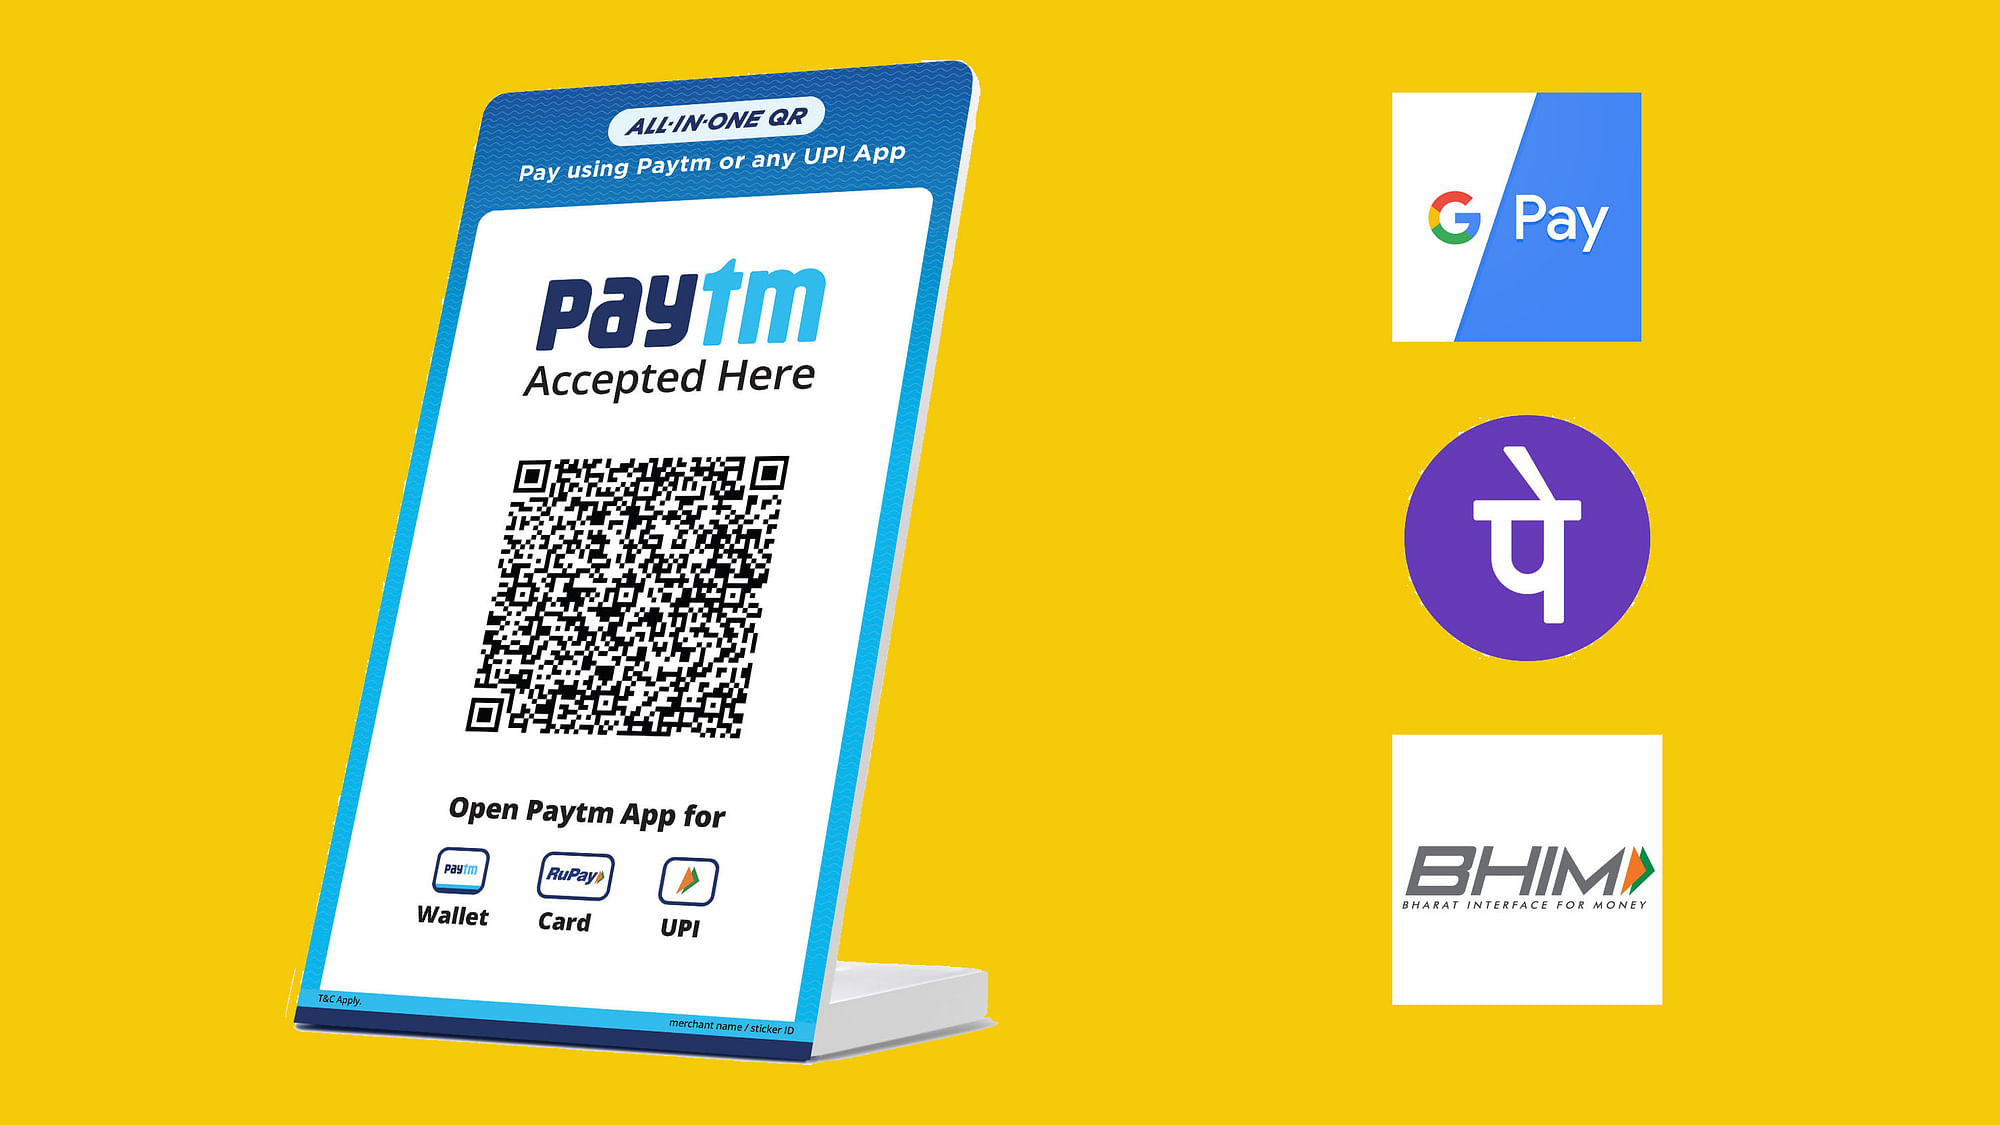 Paytm Qr Codes Now Let You Pay Via Google Pay Phonepe And More